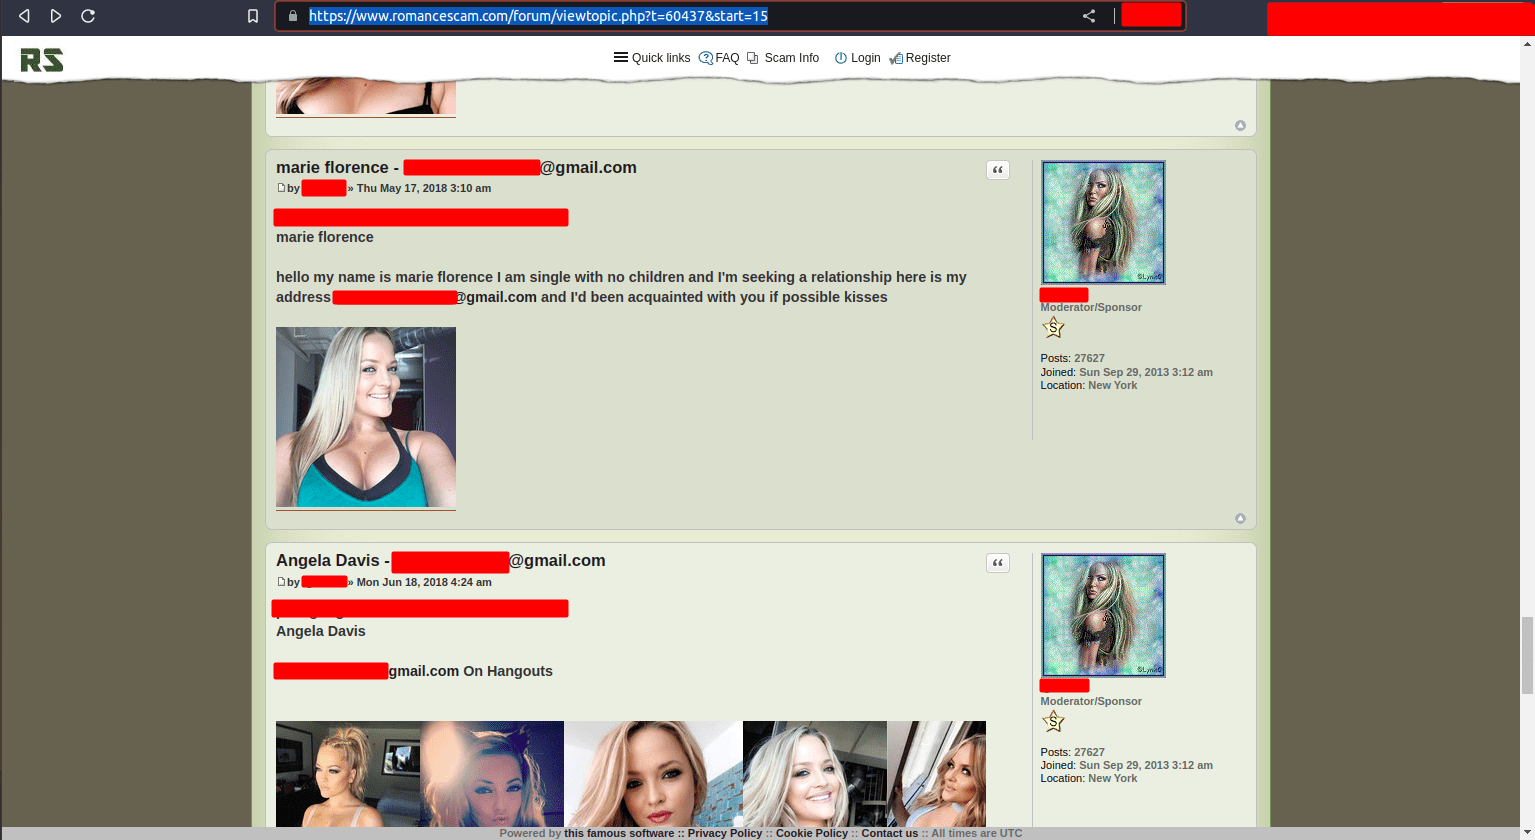 romancescam.com results showing exact stolen image used to create a fake Facebook account